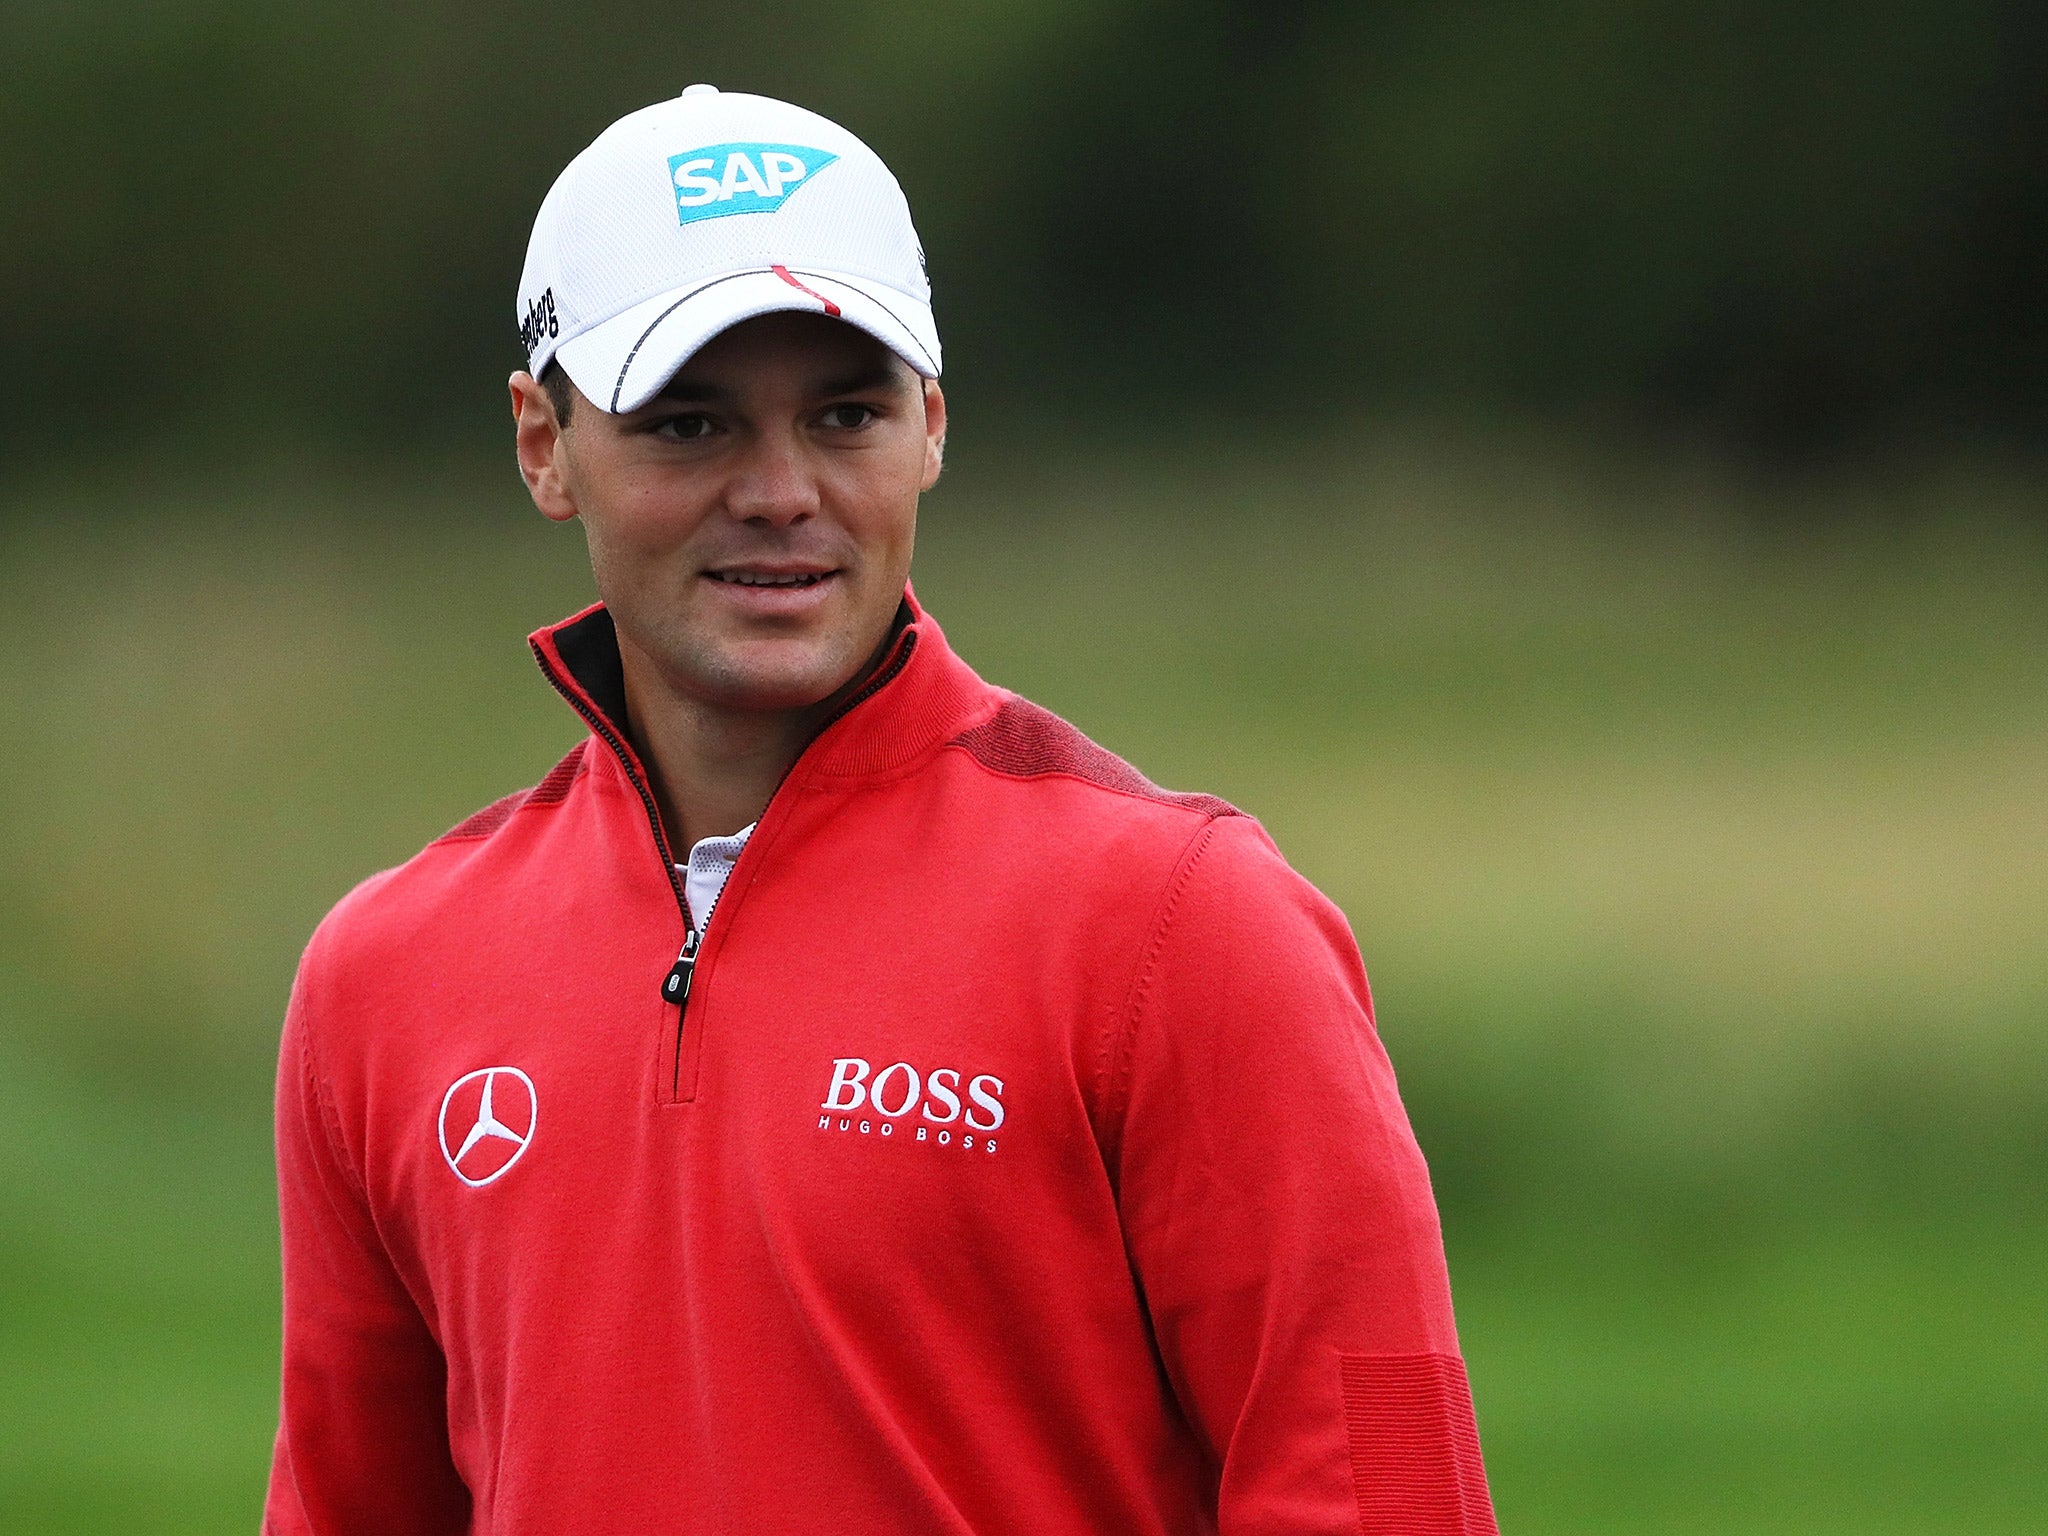 Kaymer secured the winning point in the 2012 'Miracle at Medinah'